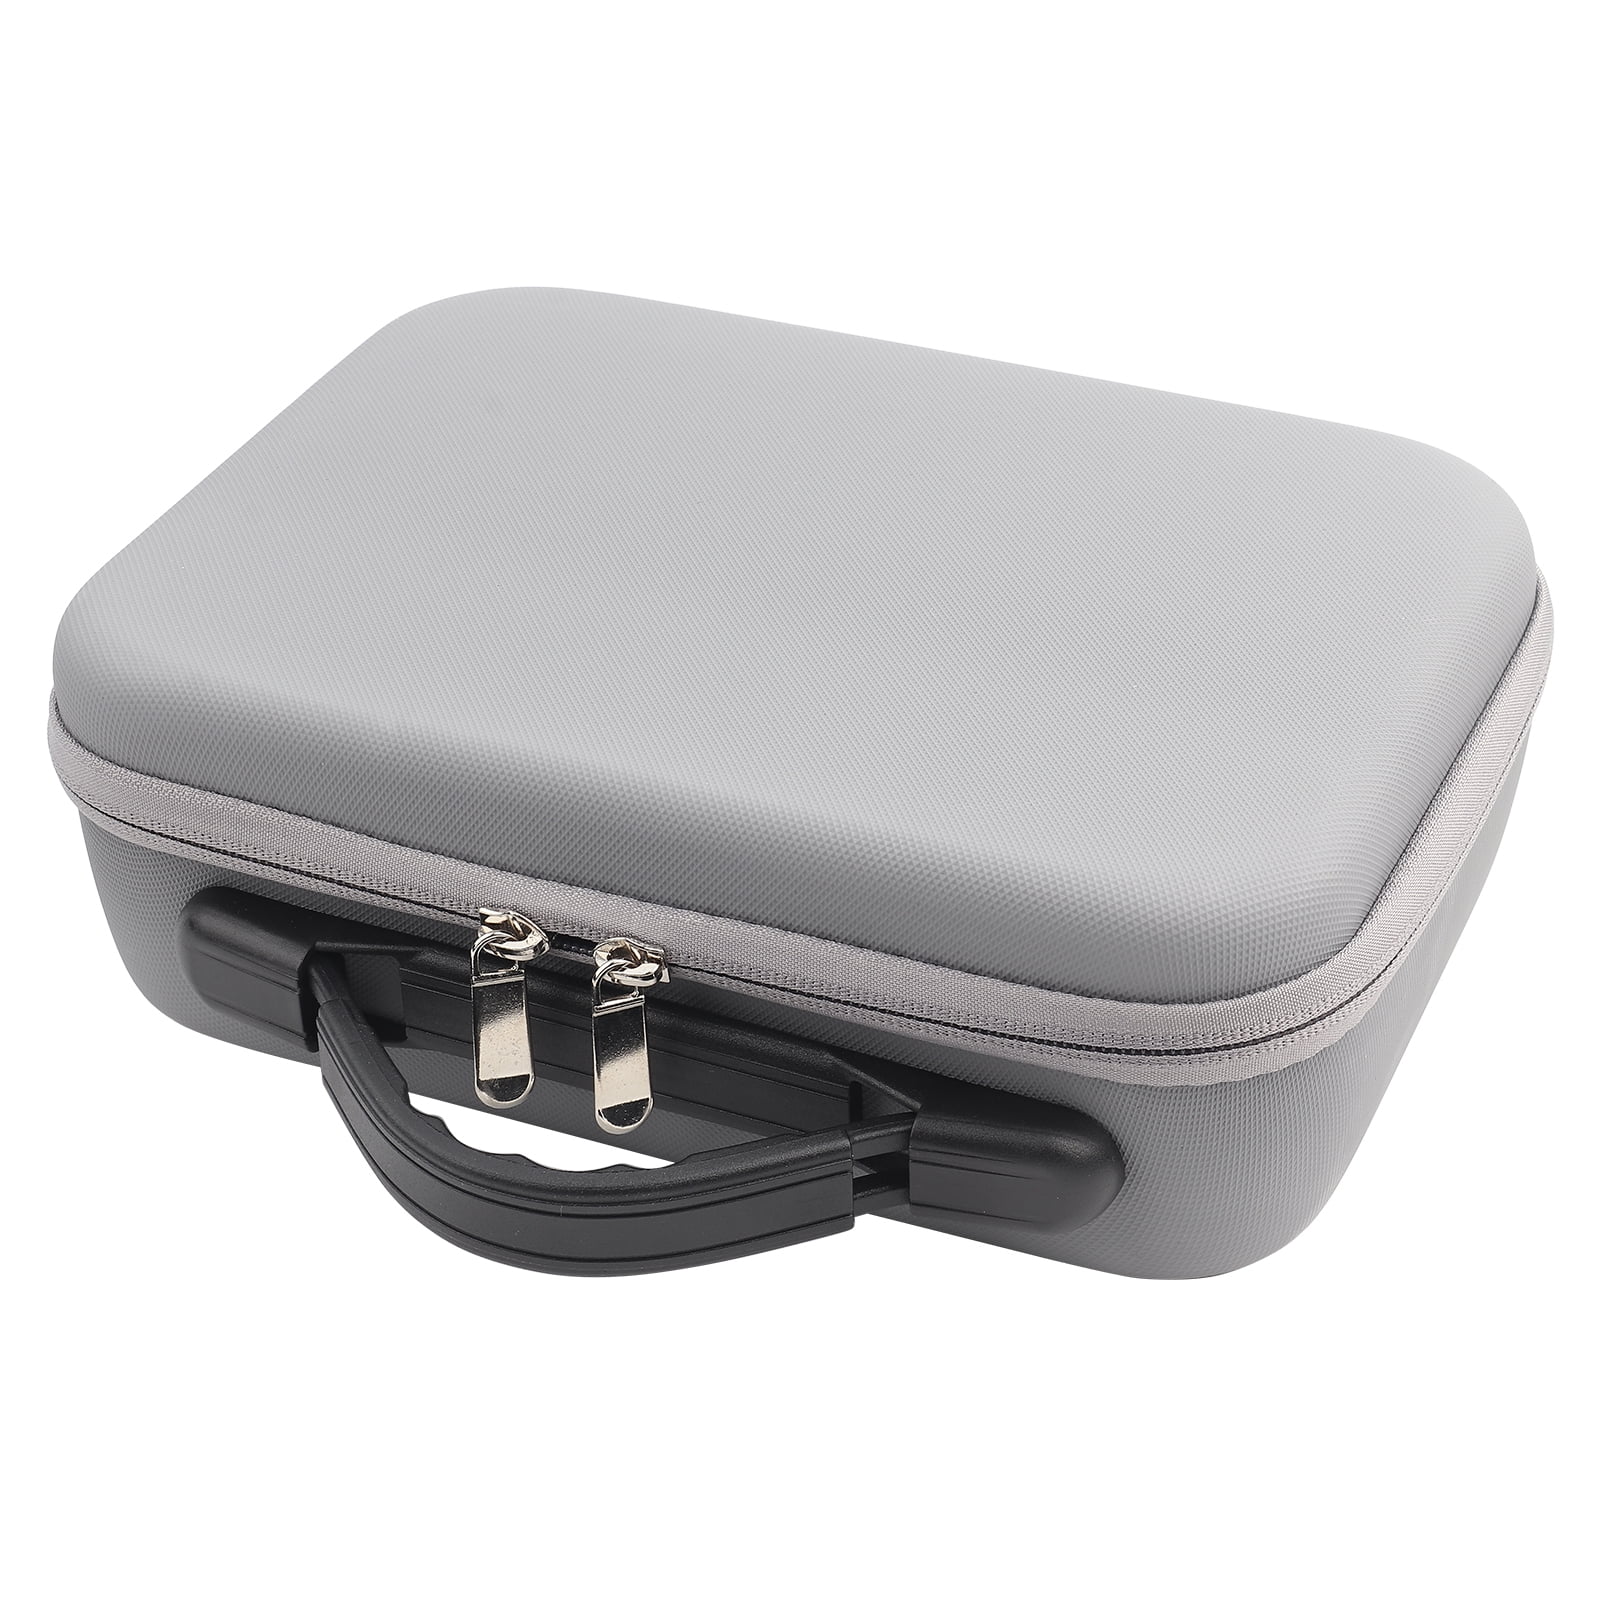 Details about  / Travel Handbag Breathable Portable Carrying Case Drone Accessories For DJI OM4